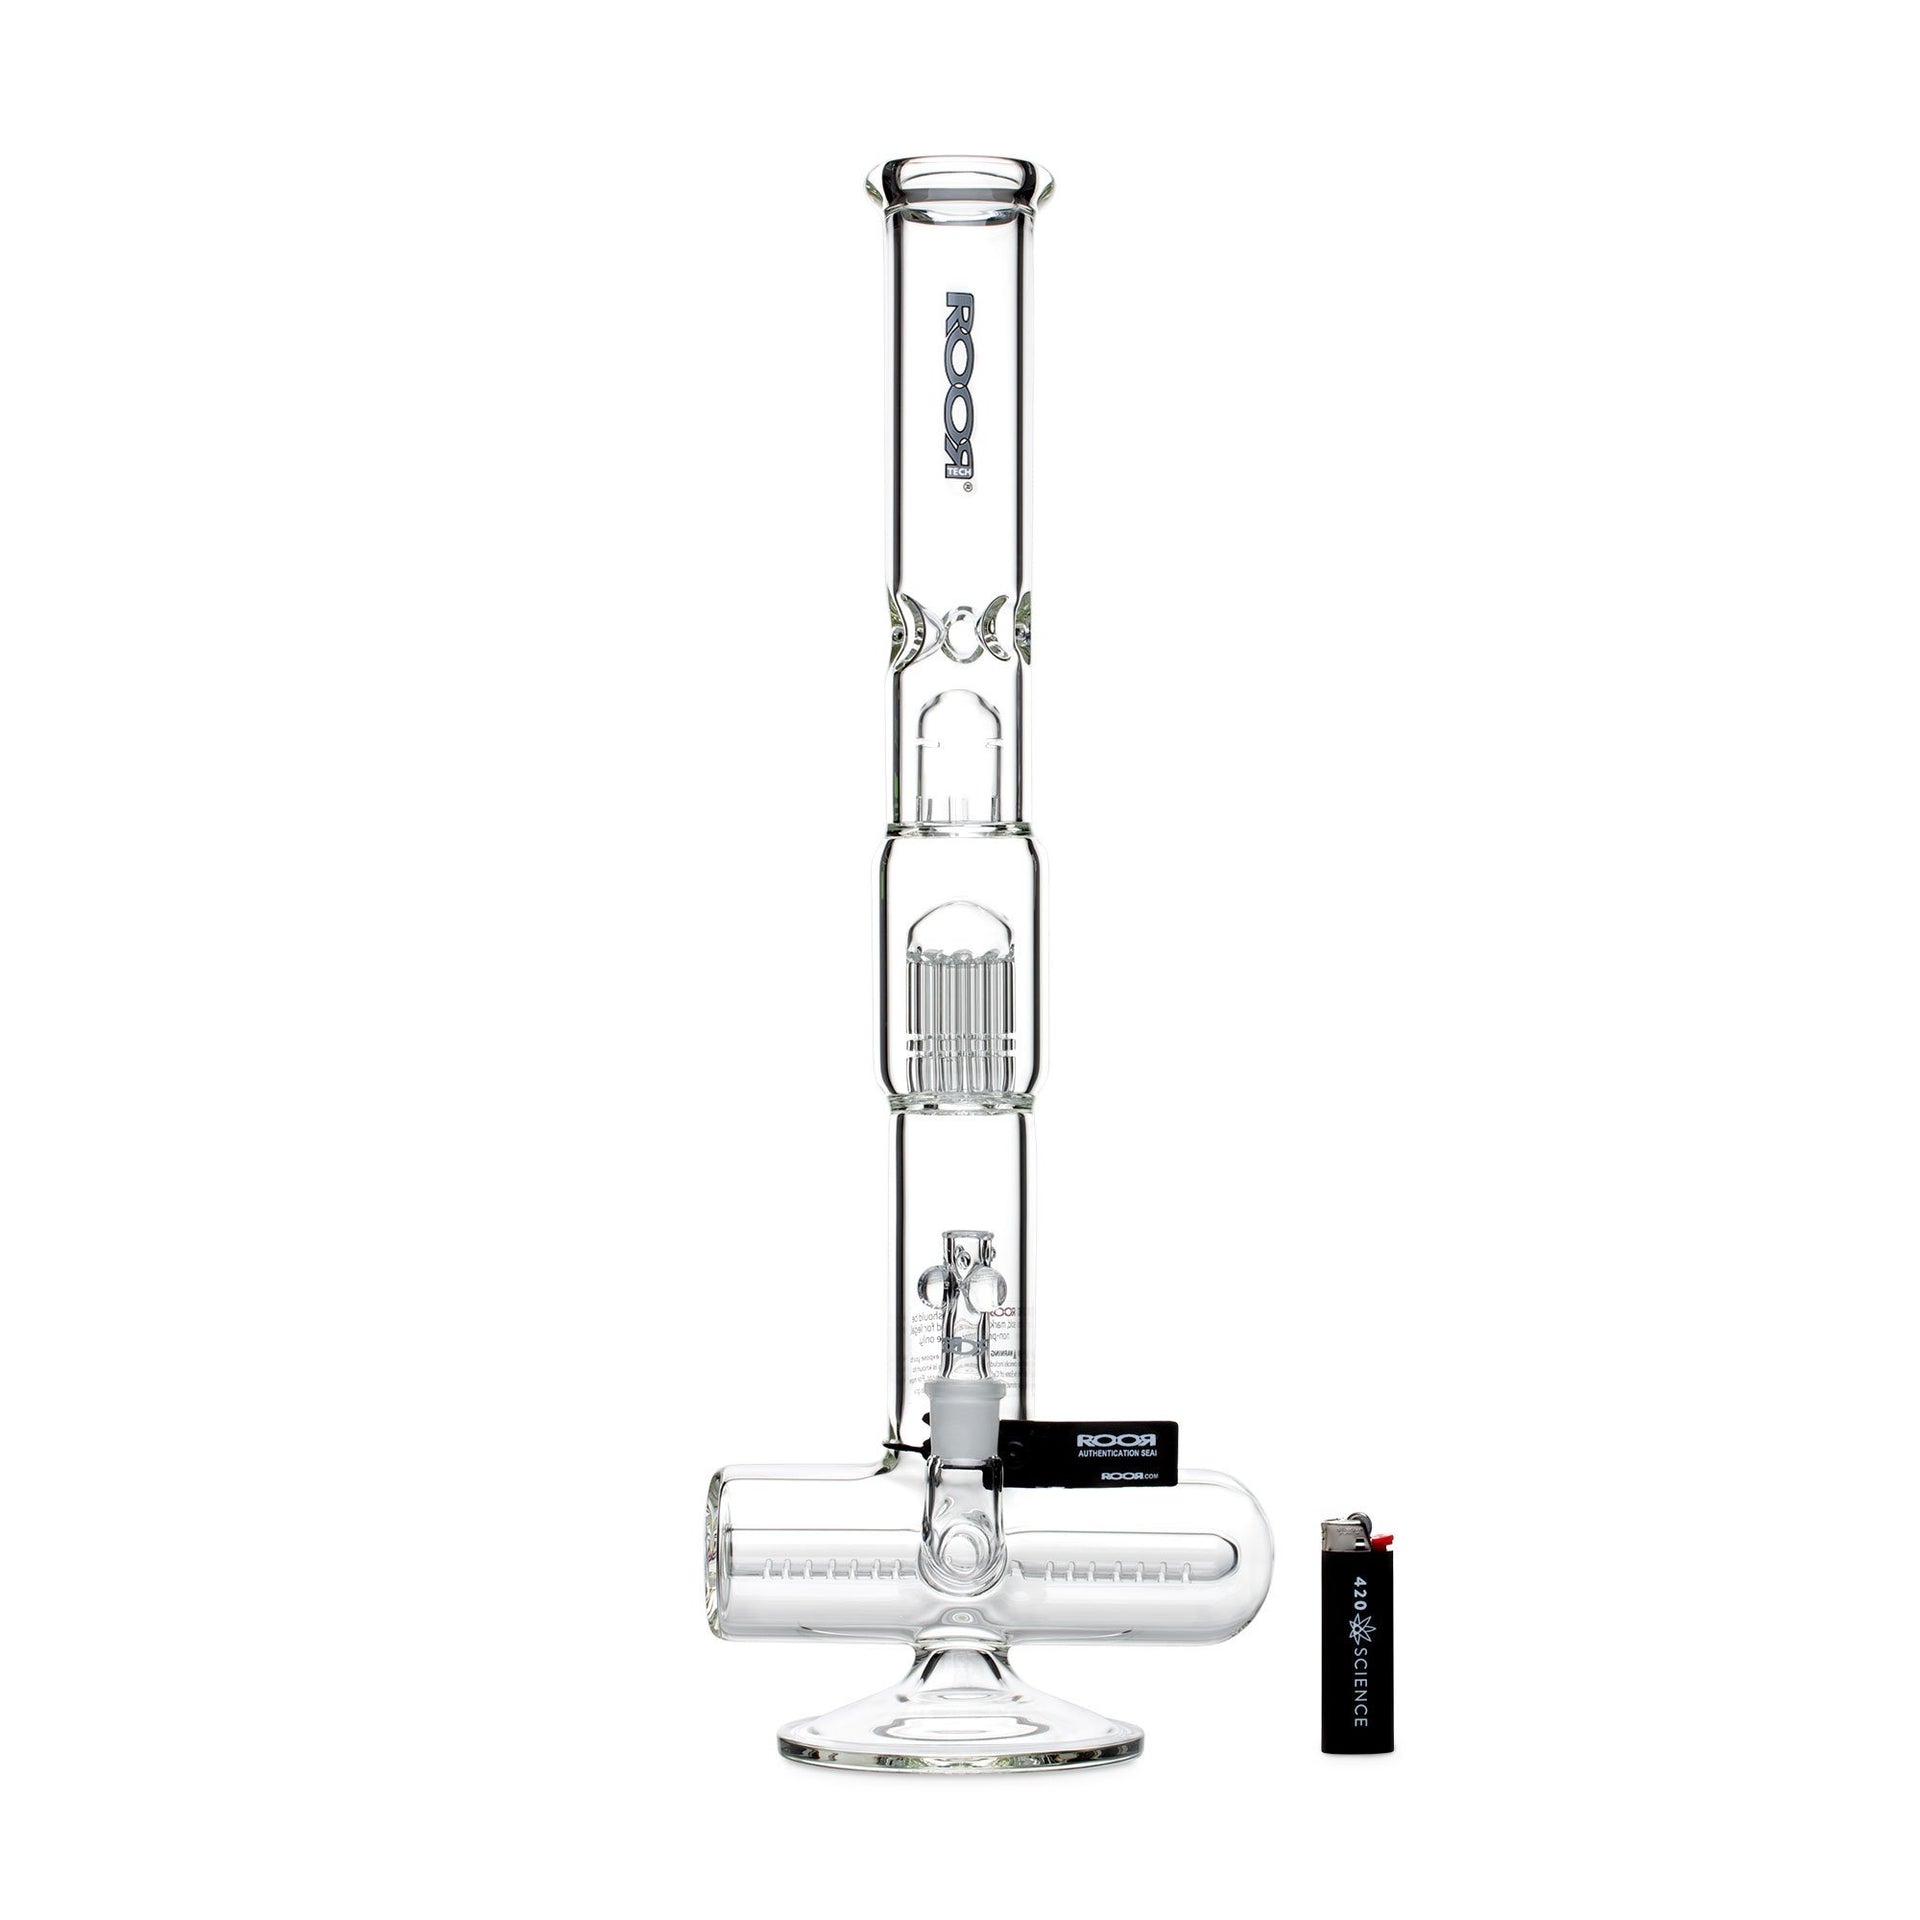 bong cleaning suggestions? : r/trees